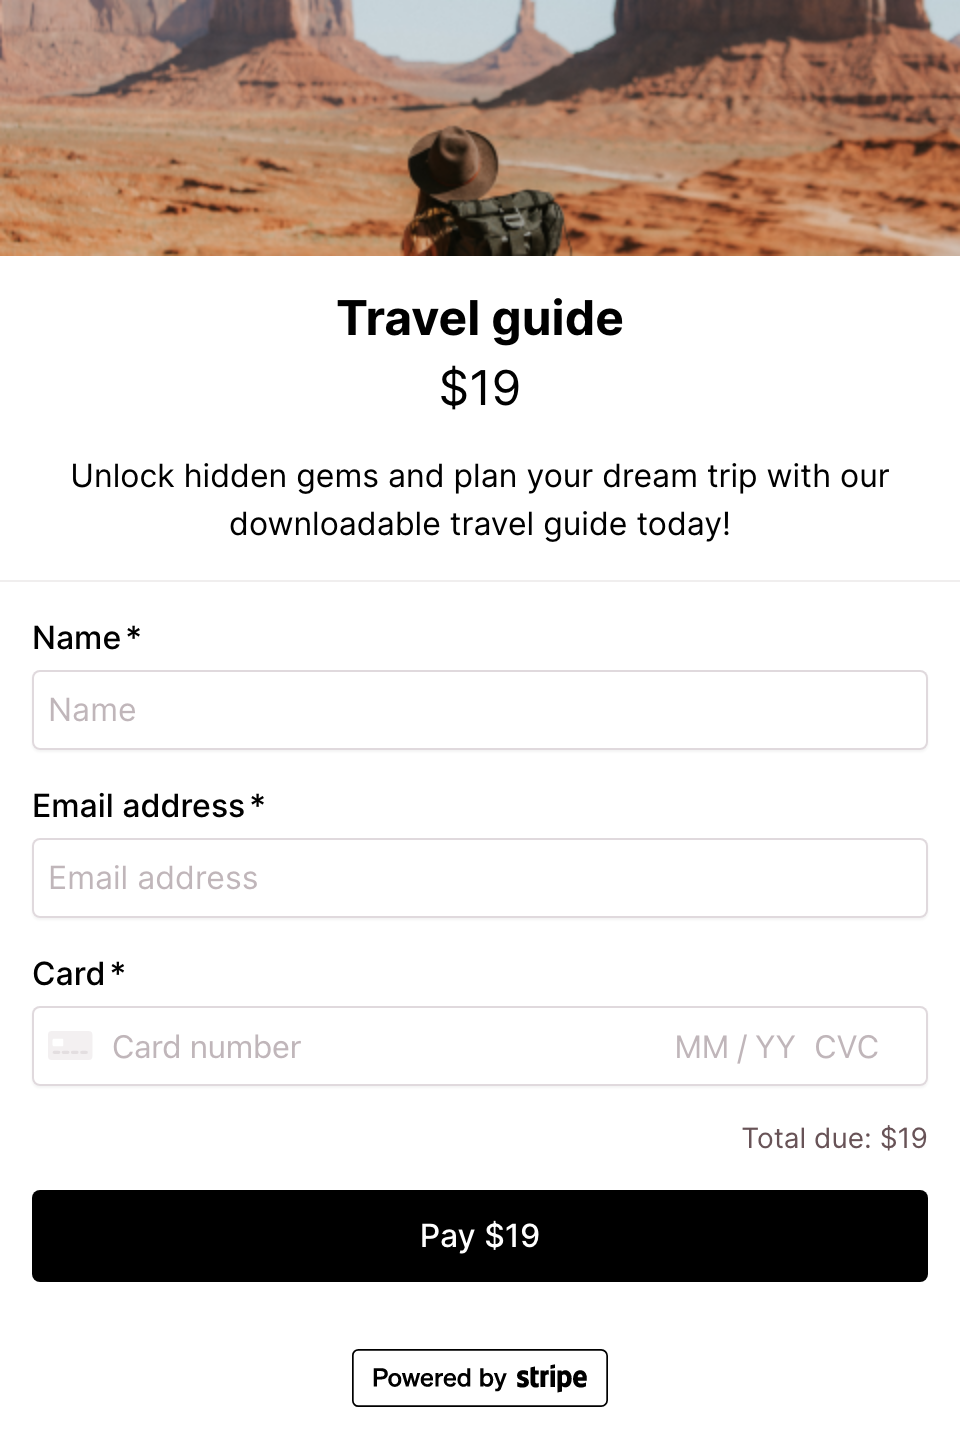 Travel guide checkout form